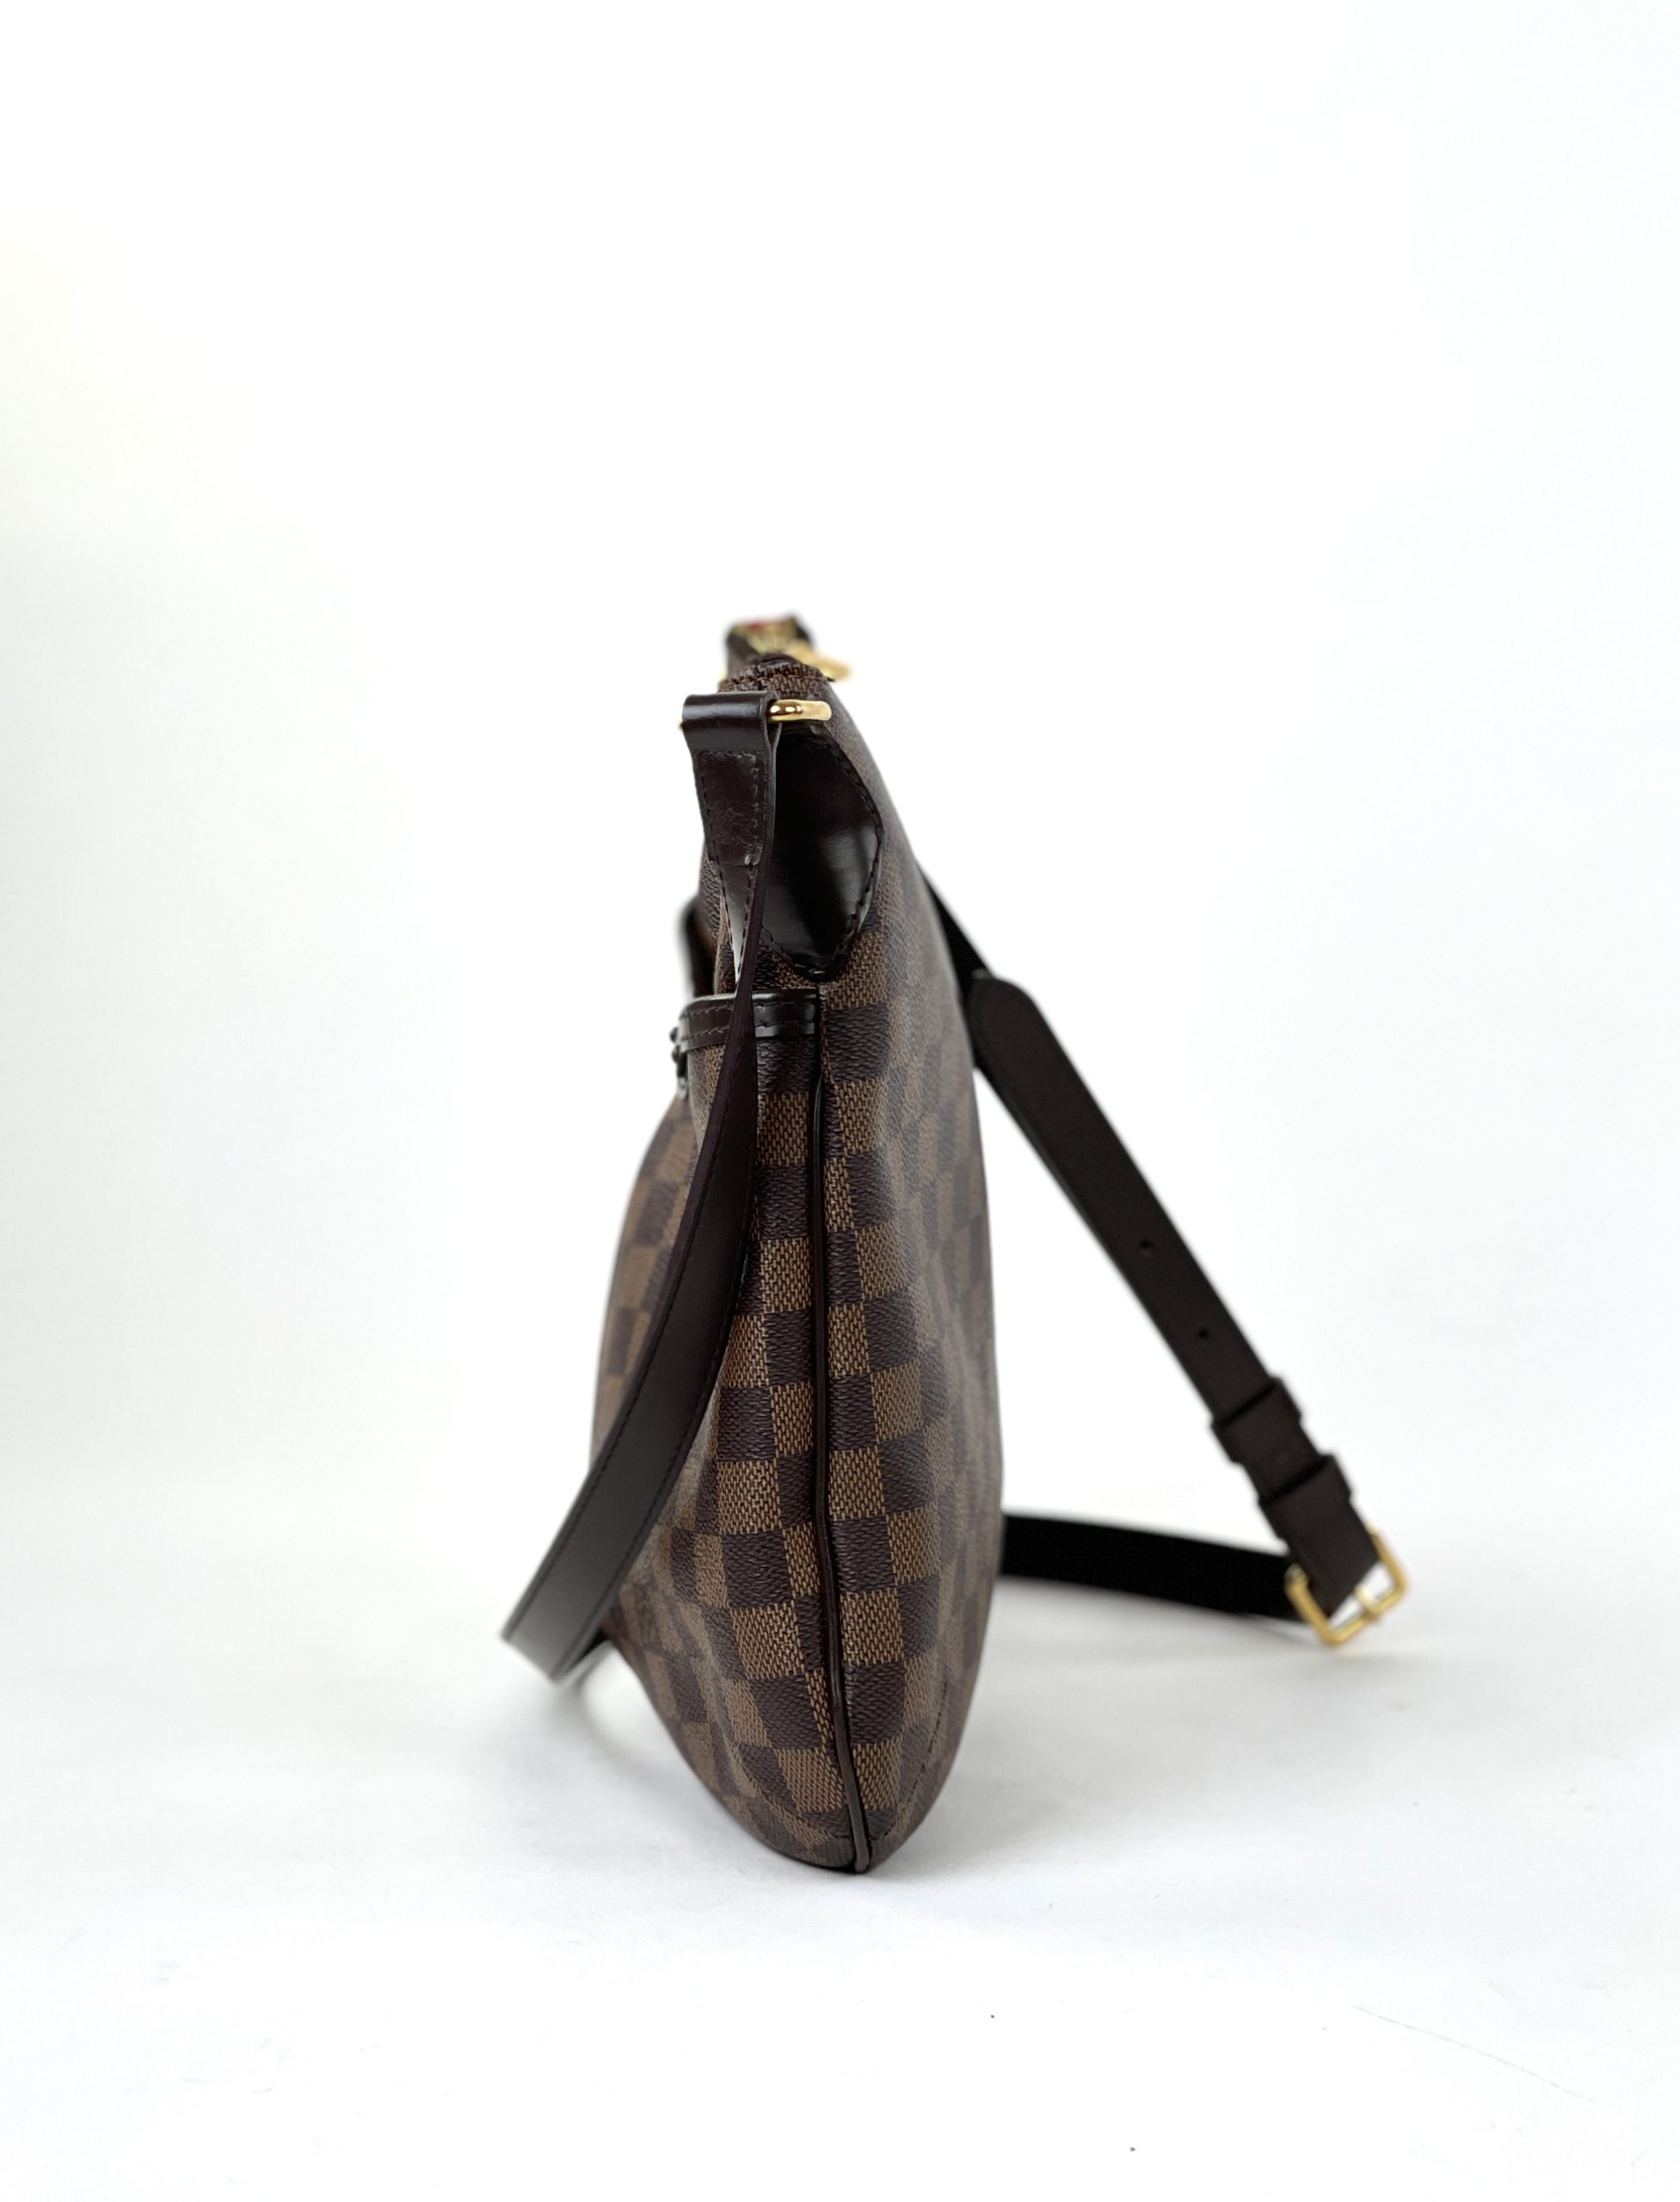 More Than You Can Imagine - In Bloom: LOUIS VUITTON Damier Ebene Bloomsbury  PM . . . #mtyci #designerconsignment #highendconsignment #luxuryconsignment  #louisvuitton #louis #lv #lvbag #lvdamier #damierebene #shophouston